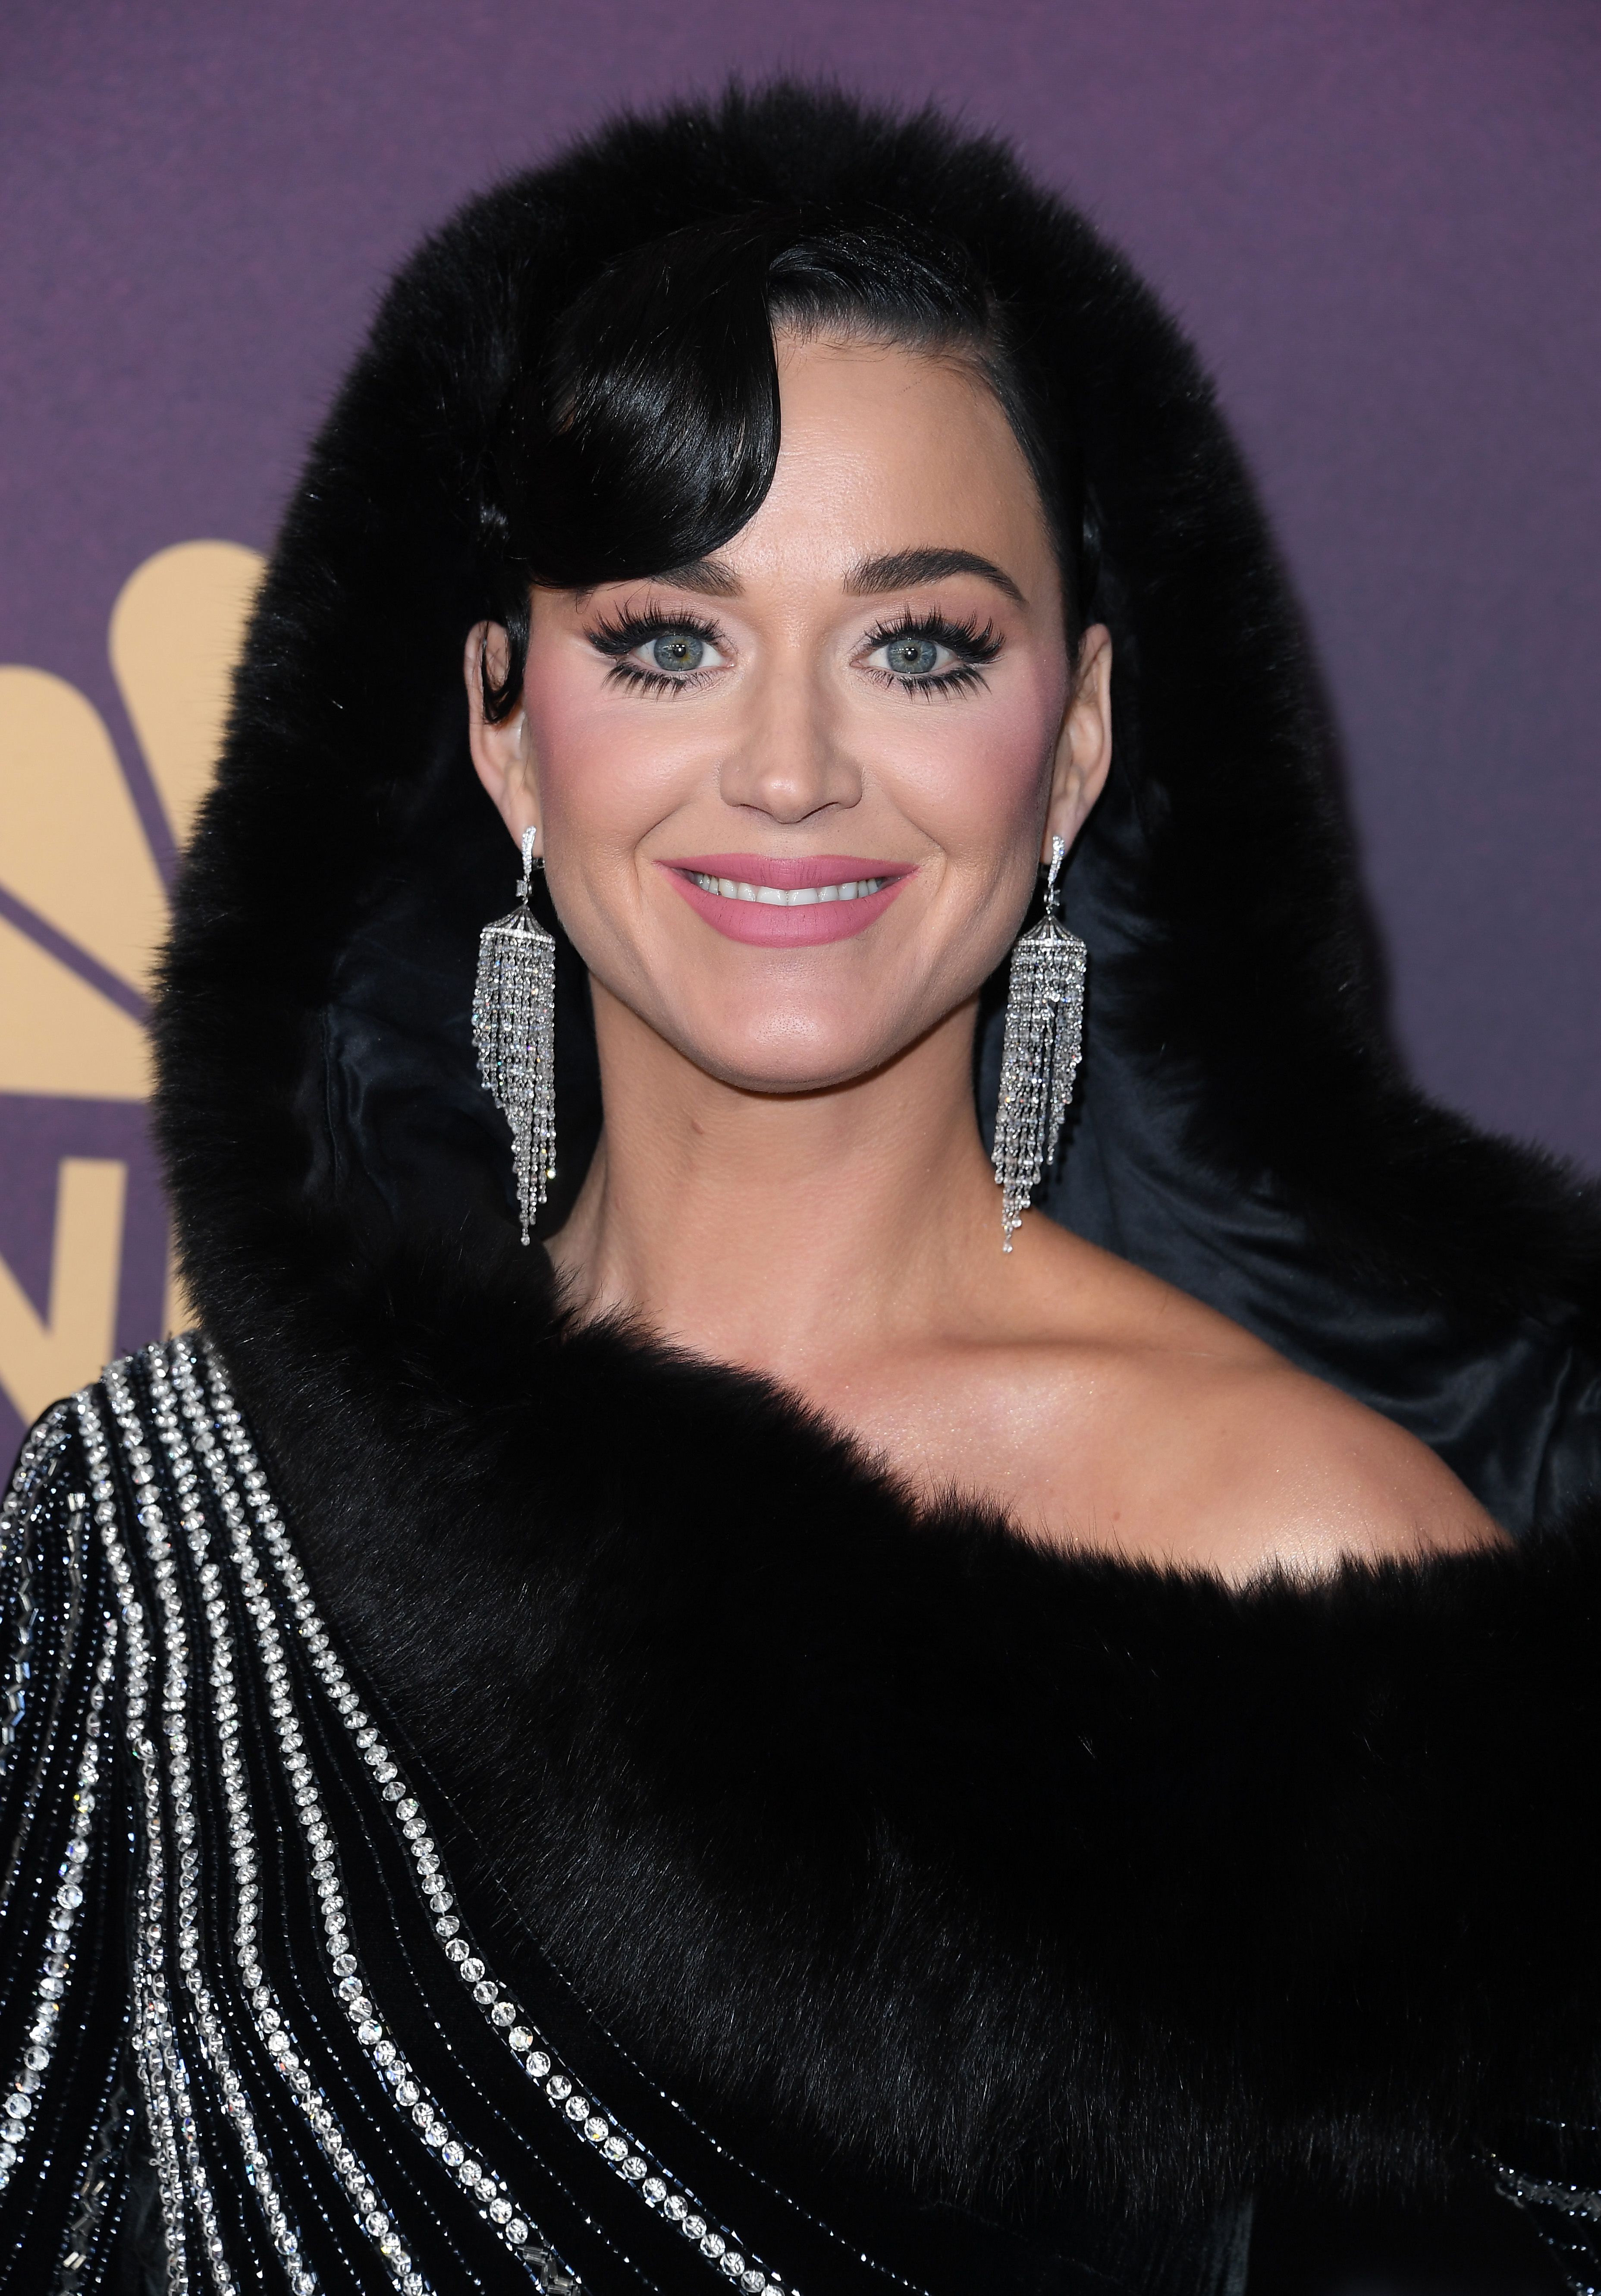 Katy Perry on March 02, 2023, in Los Angeles, California. | Source: Getty Images